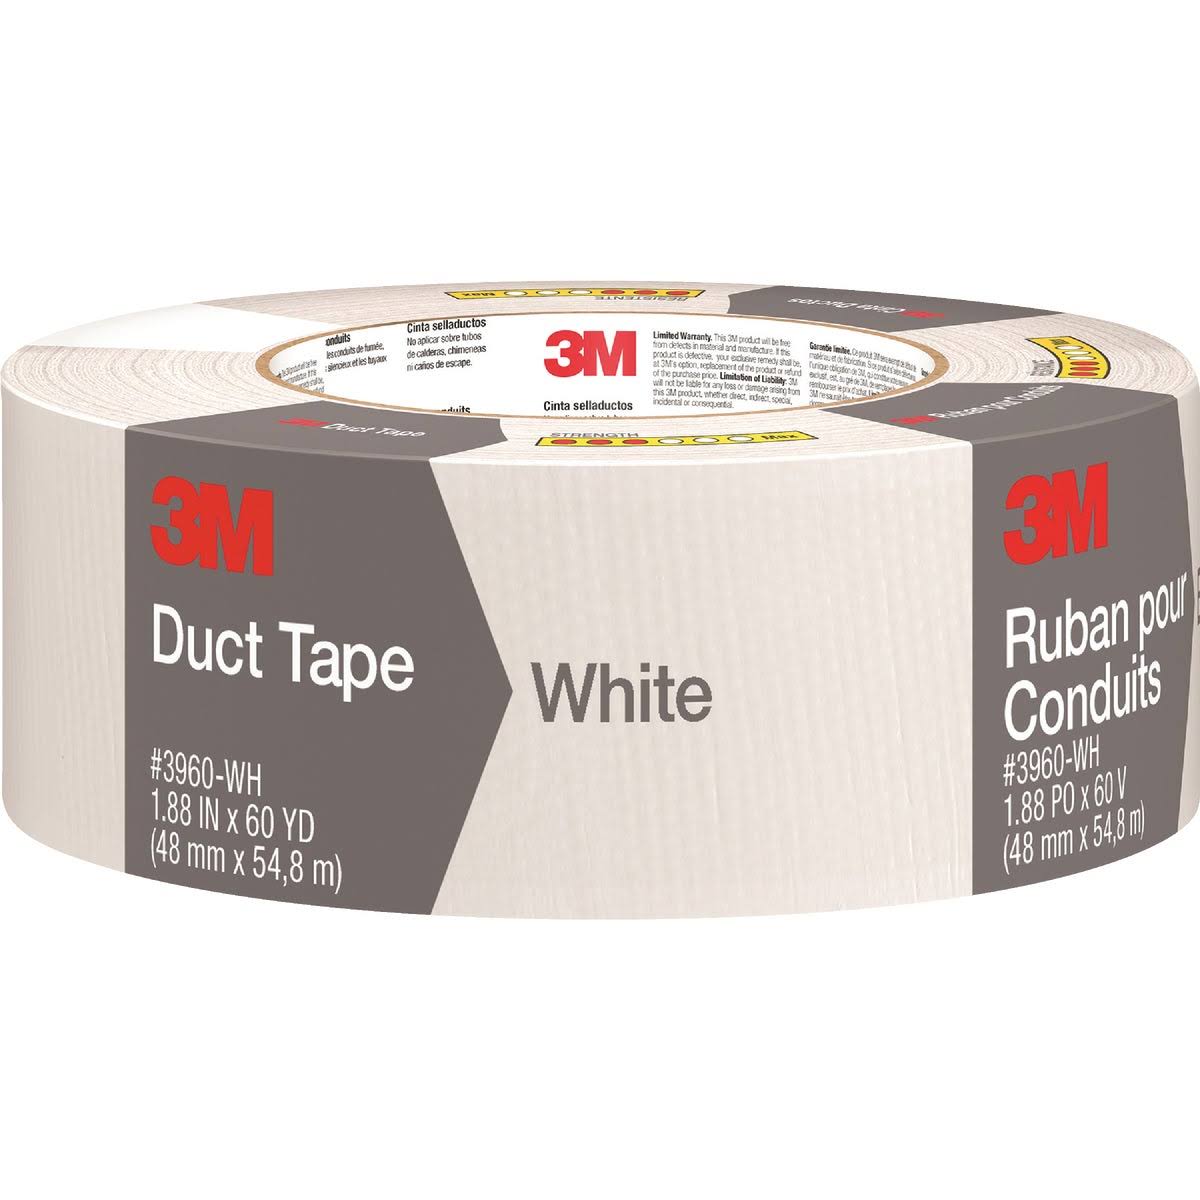 3M Duct Tape - White, 1.88" x 60yd